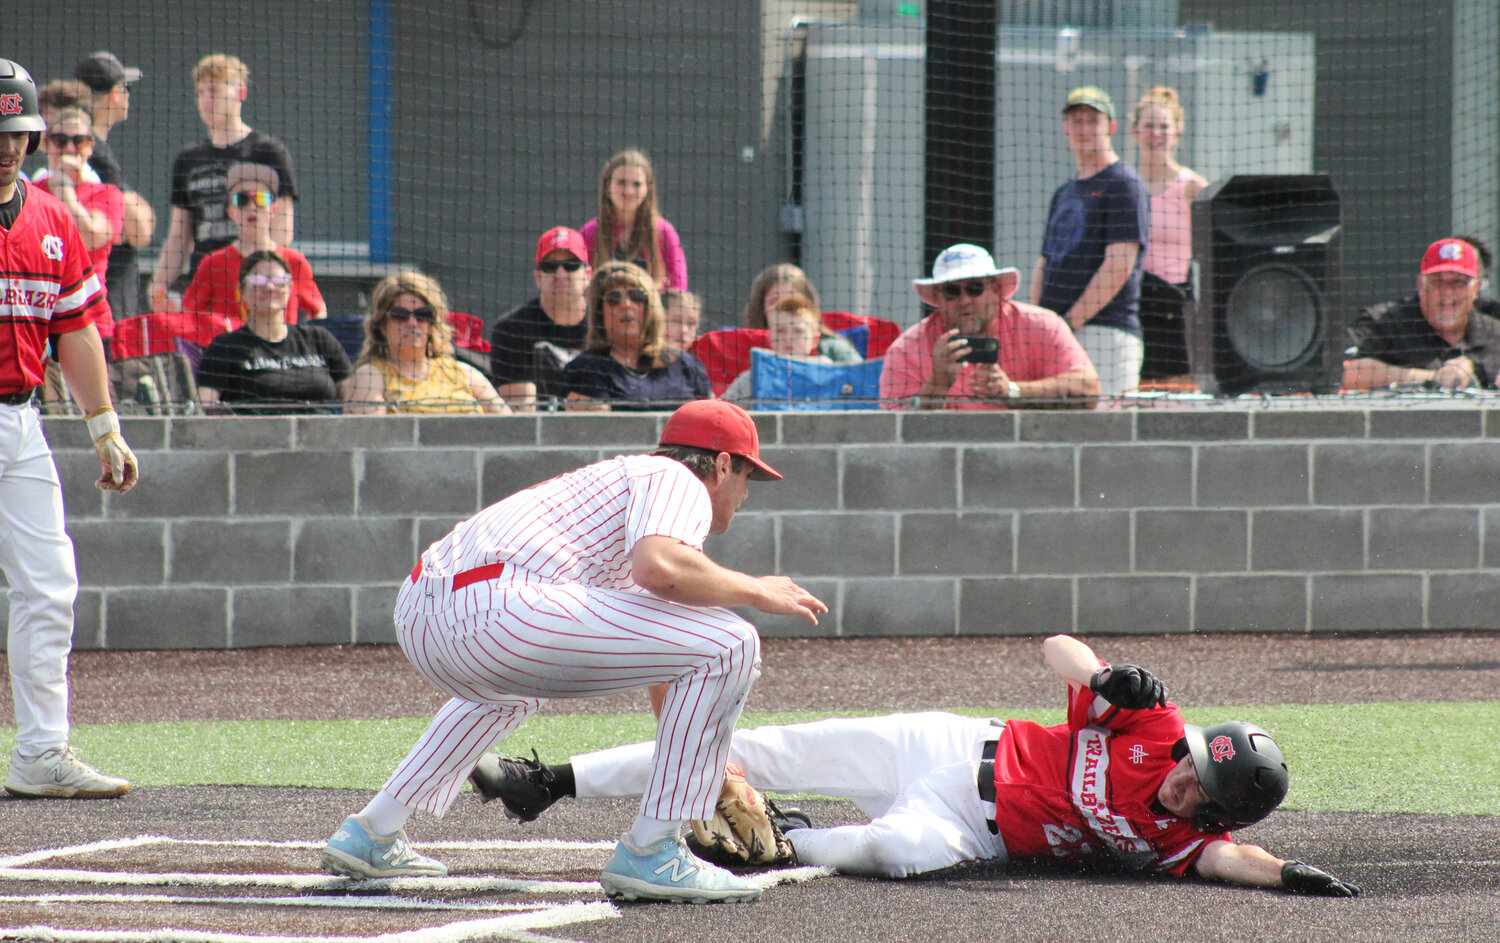 Community R-6 senior pitcher Gavin Allen tags out Northland Christian's Joshua Wolf trying top score on Monday in a state playoff game at Creekside Baseball Complex in Parkville. The Trojans won 5-1 and will host Sacred Heart at 5 p.m. today for a chance to go to the state Final Four.